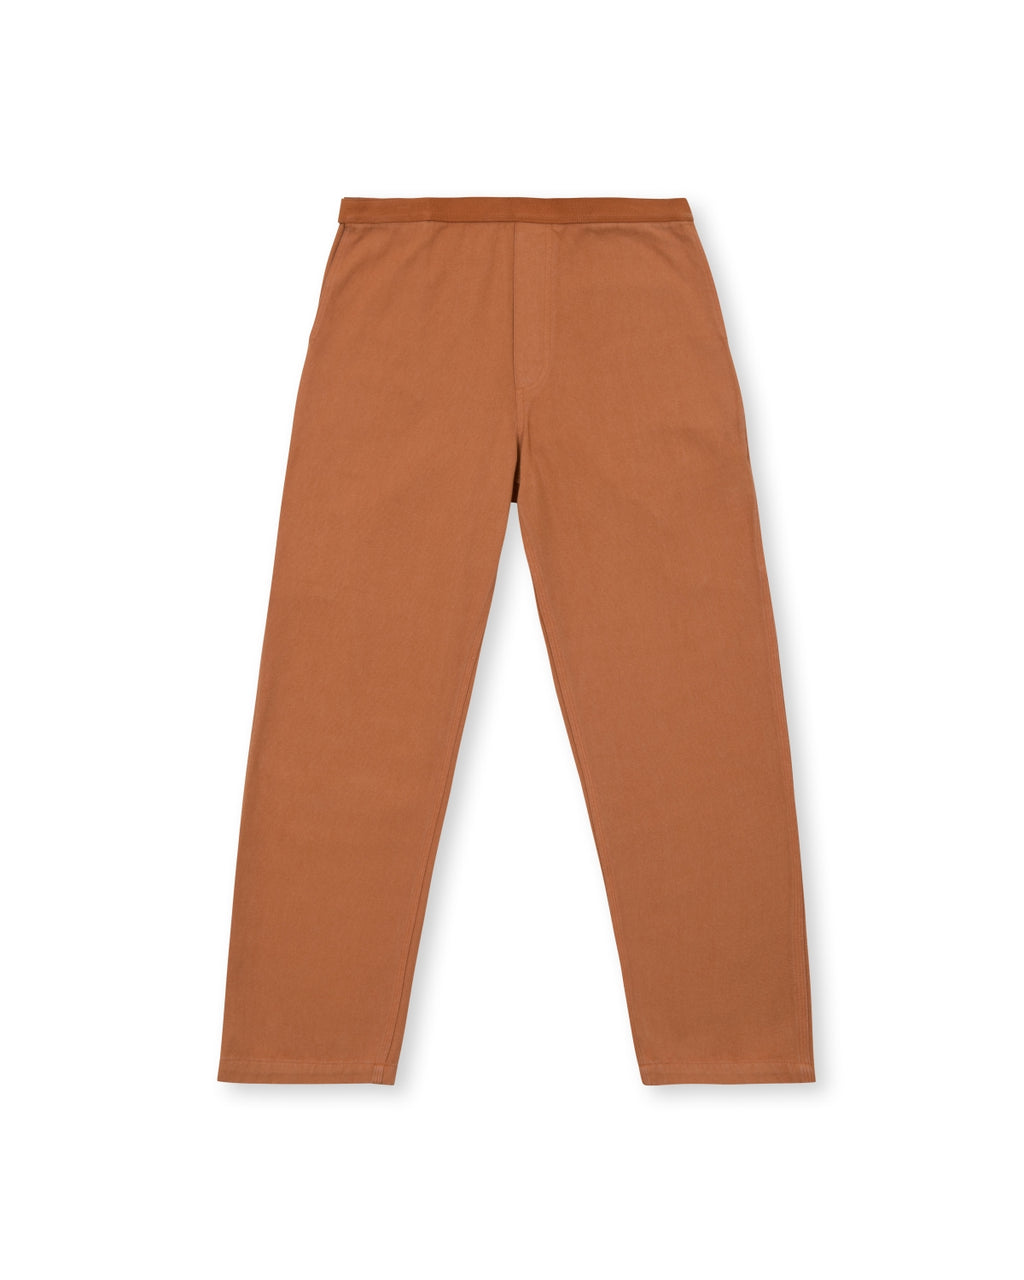 Washed Hard Ware/ Soft Wear Carpenter Pant - Duck Brown 1